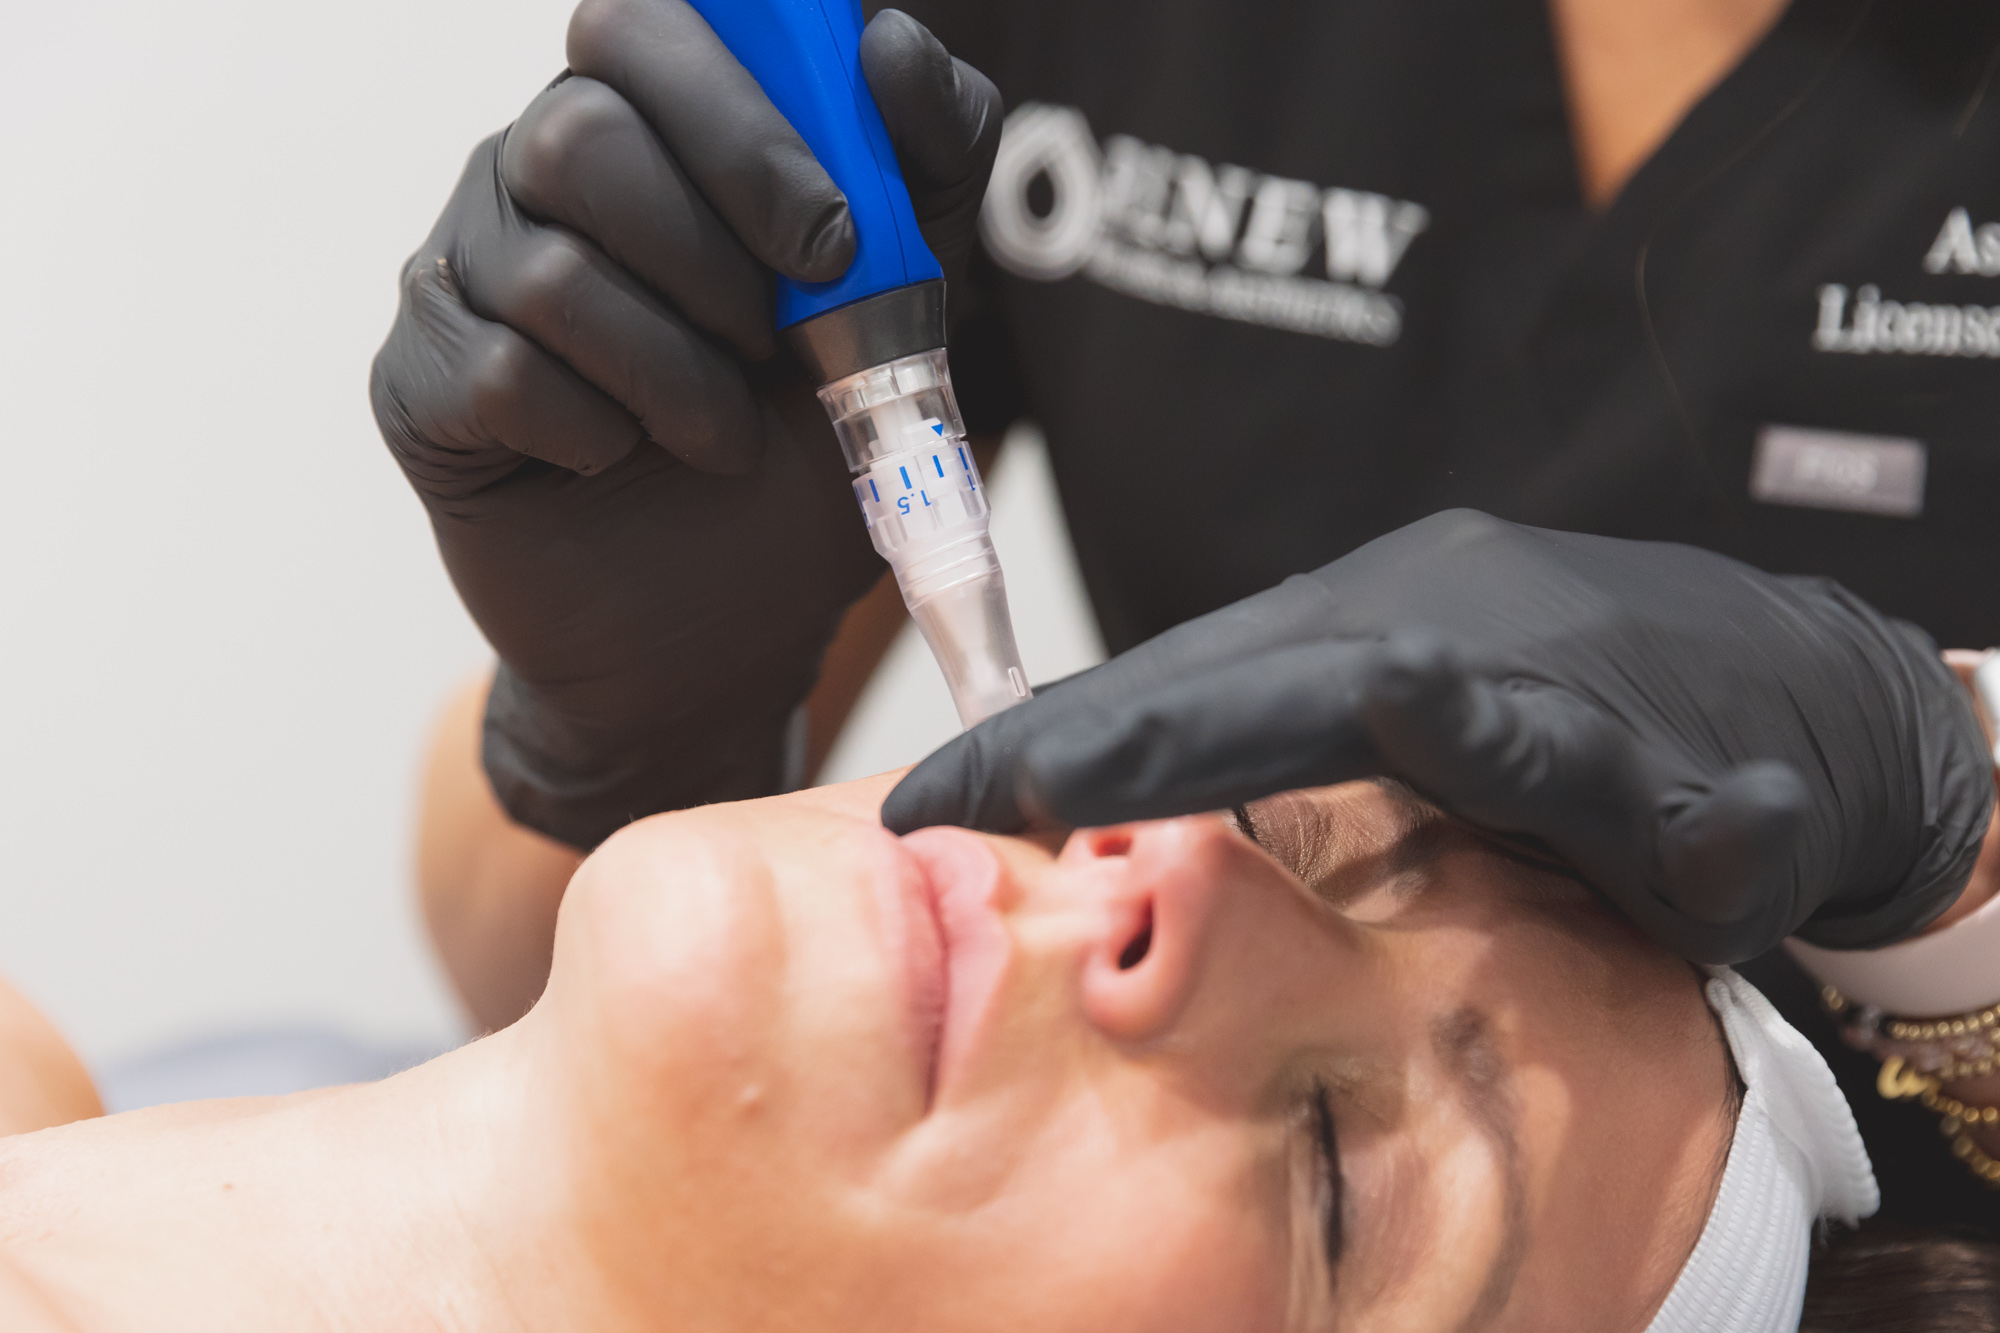 skinpen microneedling tool in use on womans face